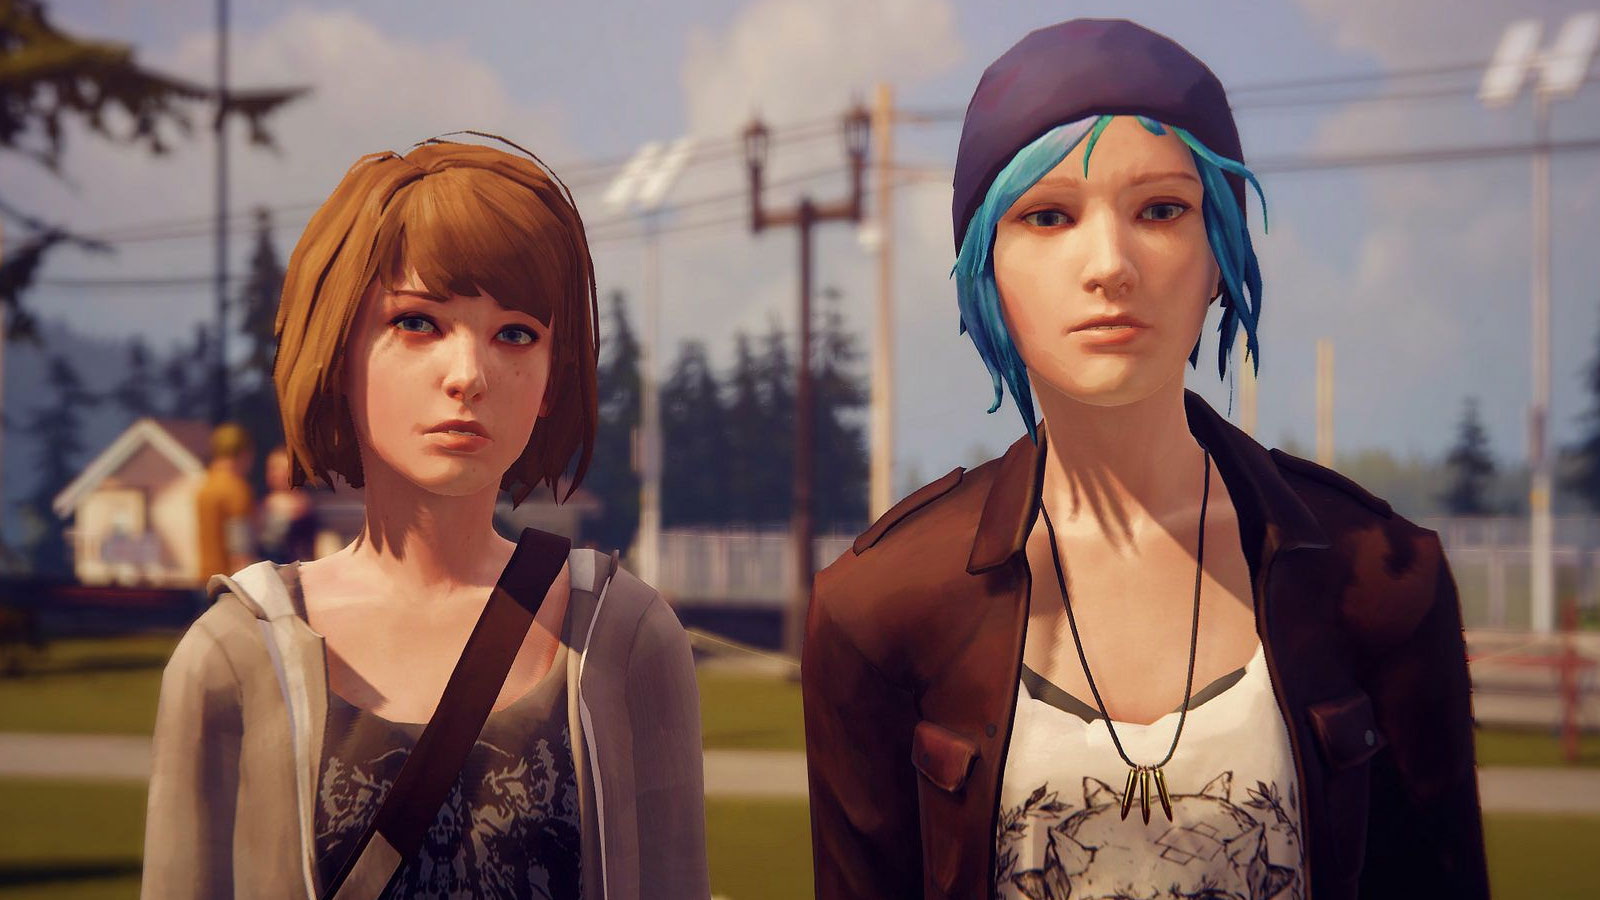 Max and Chloe stand on a lawn, faces slightly tense.